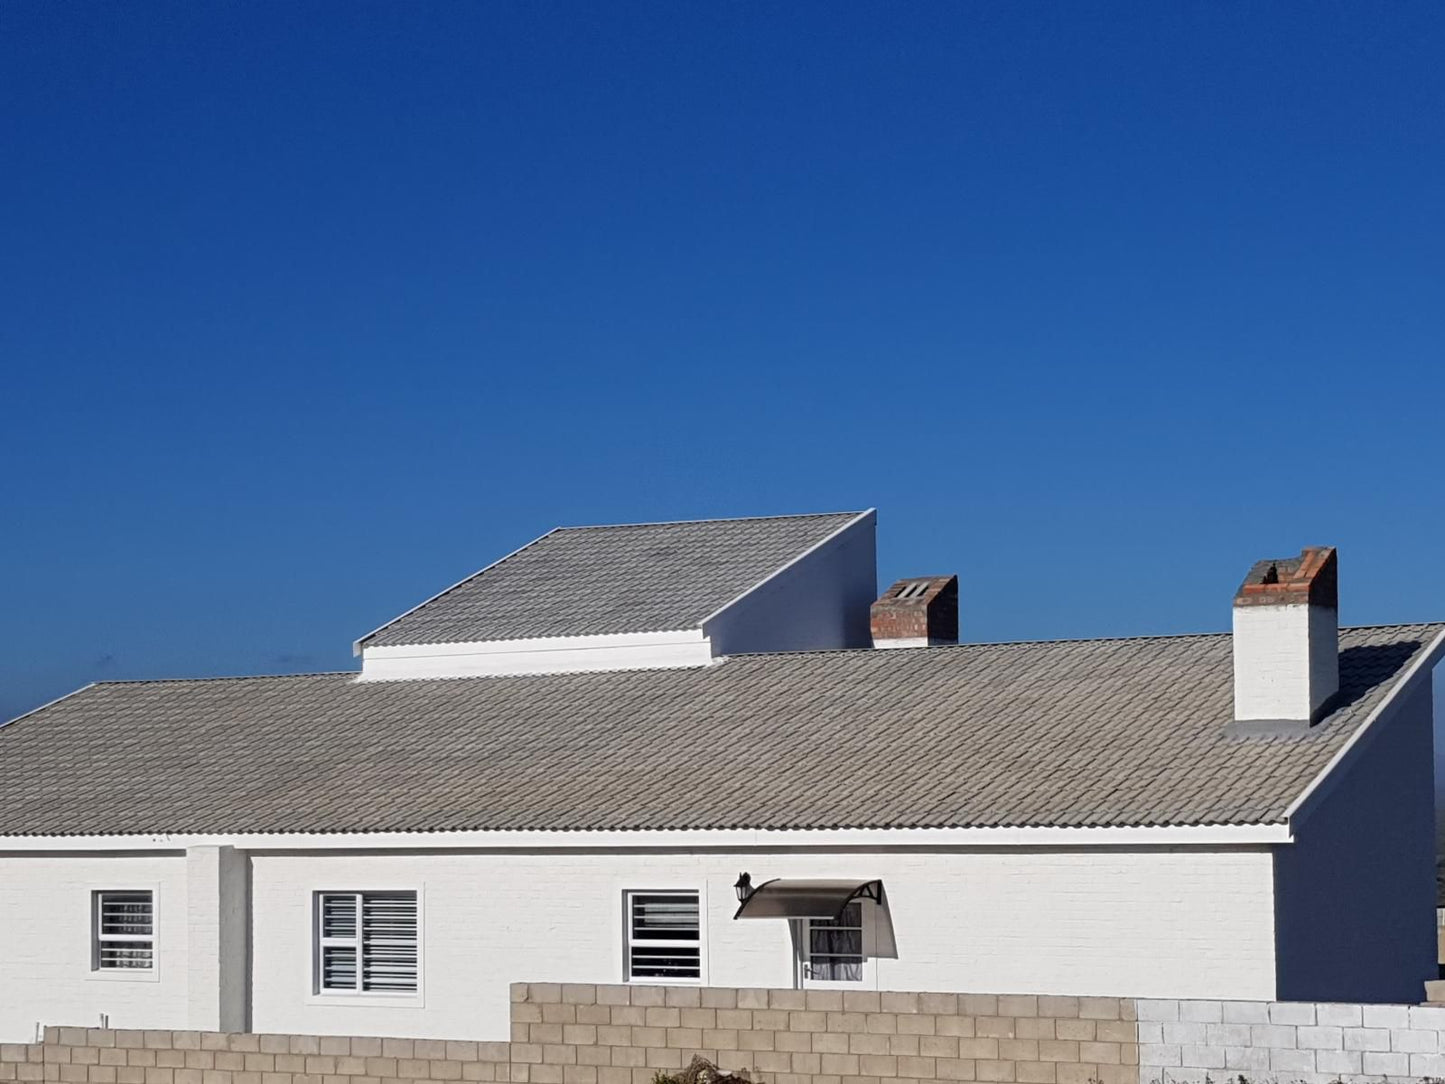 Sonvanger Villa Self Catering Yzerfontein Western Cape South Africa Building, Architecture, House